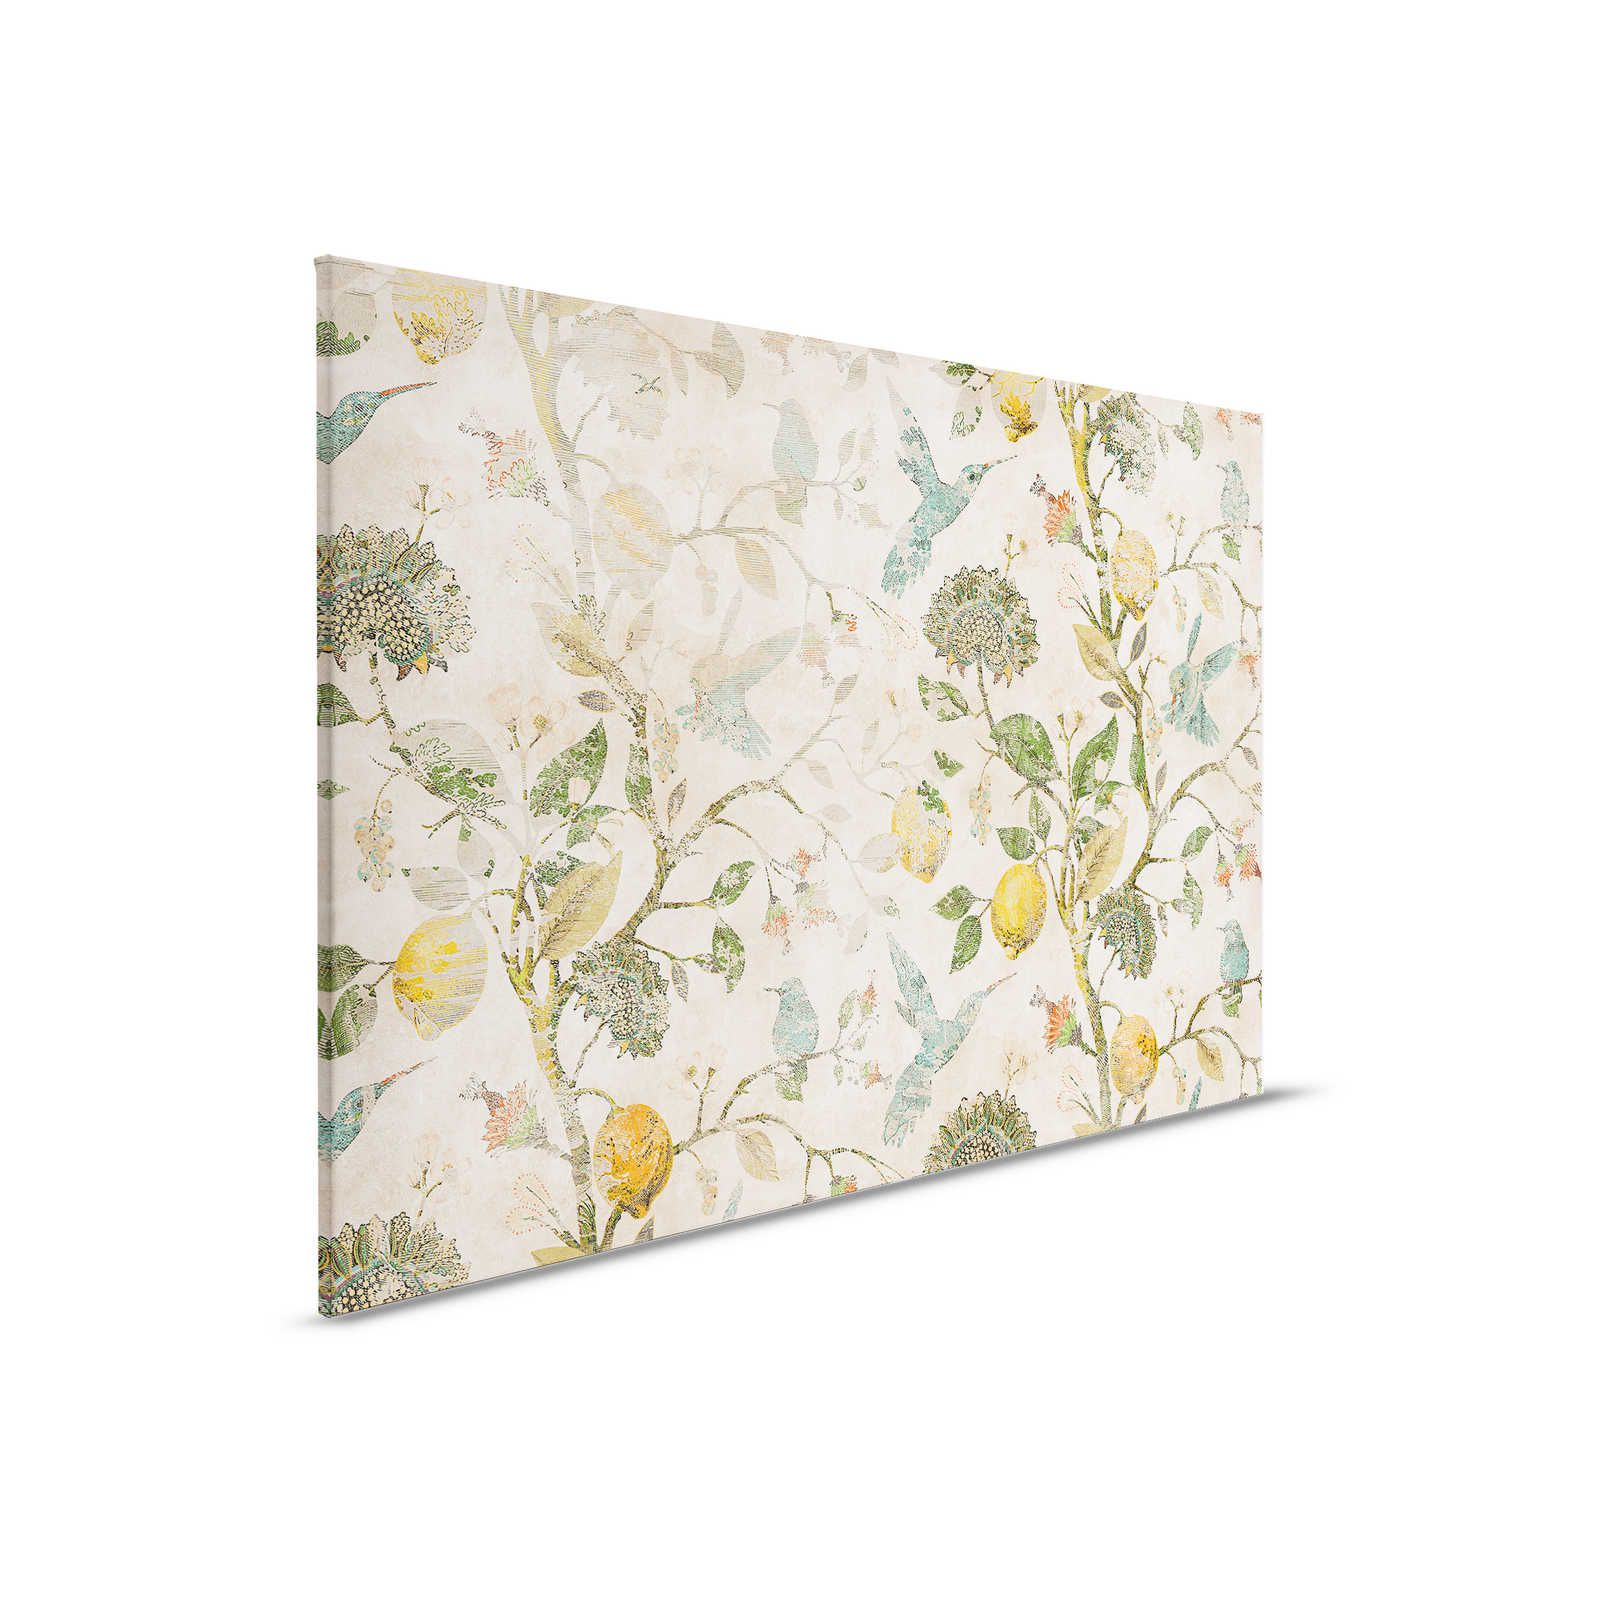         In the Lemon Tree 2 - Vintage Style Lemon Canvas Picture with Leaves & Birds - 0.90 m x 0.60 m
    